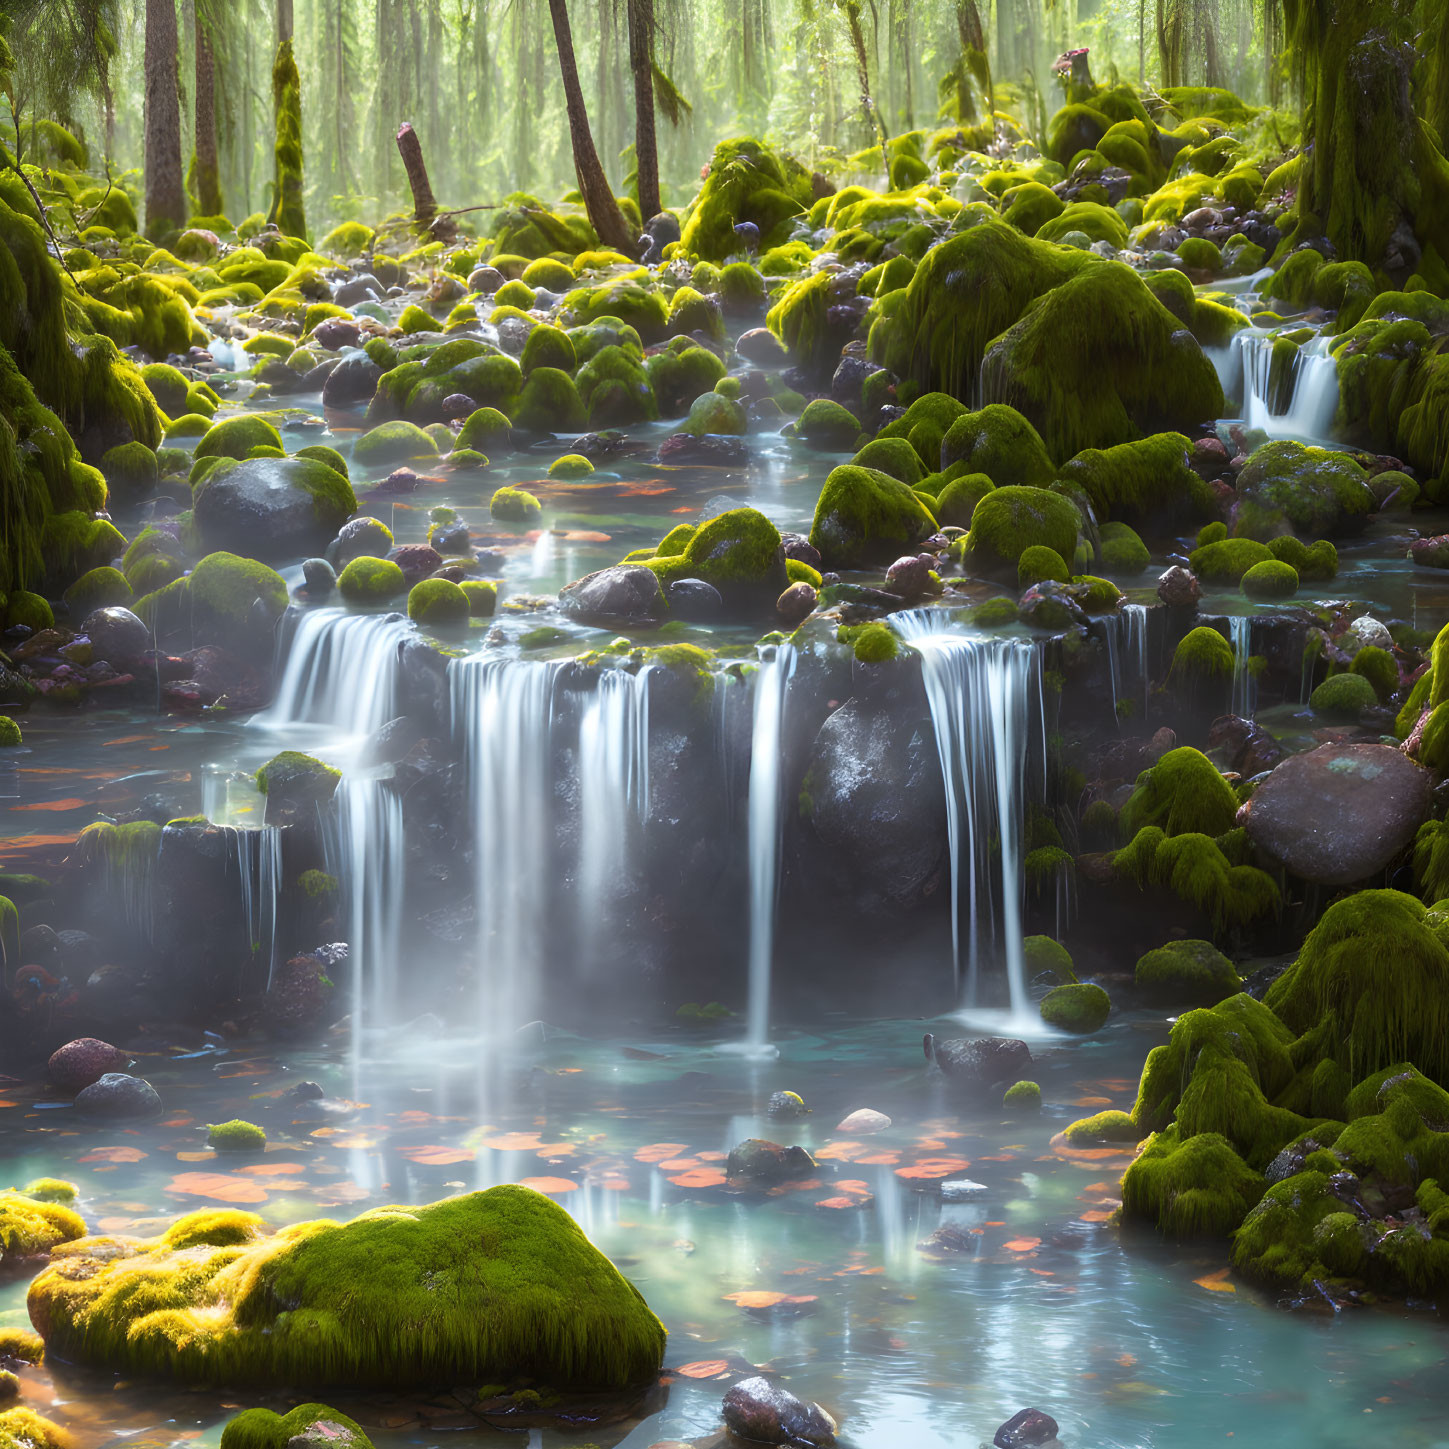 Tranquil forest waterfall scene with sunlight rays and moss-covered rocks